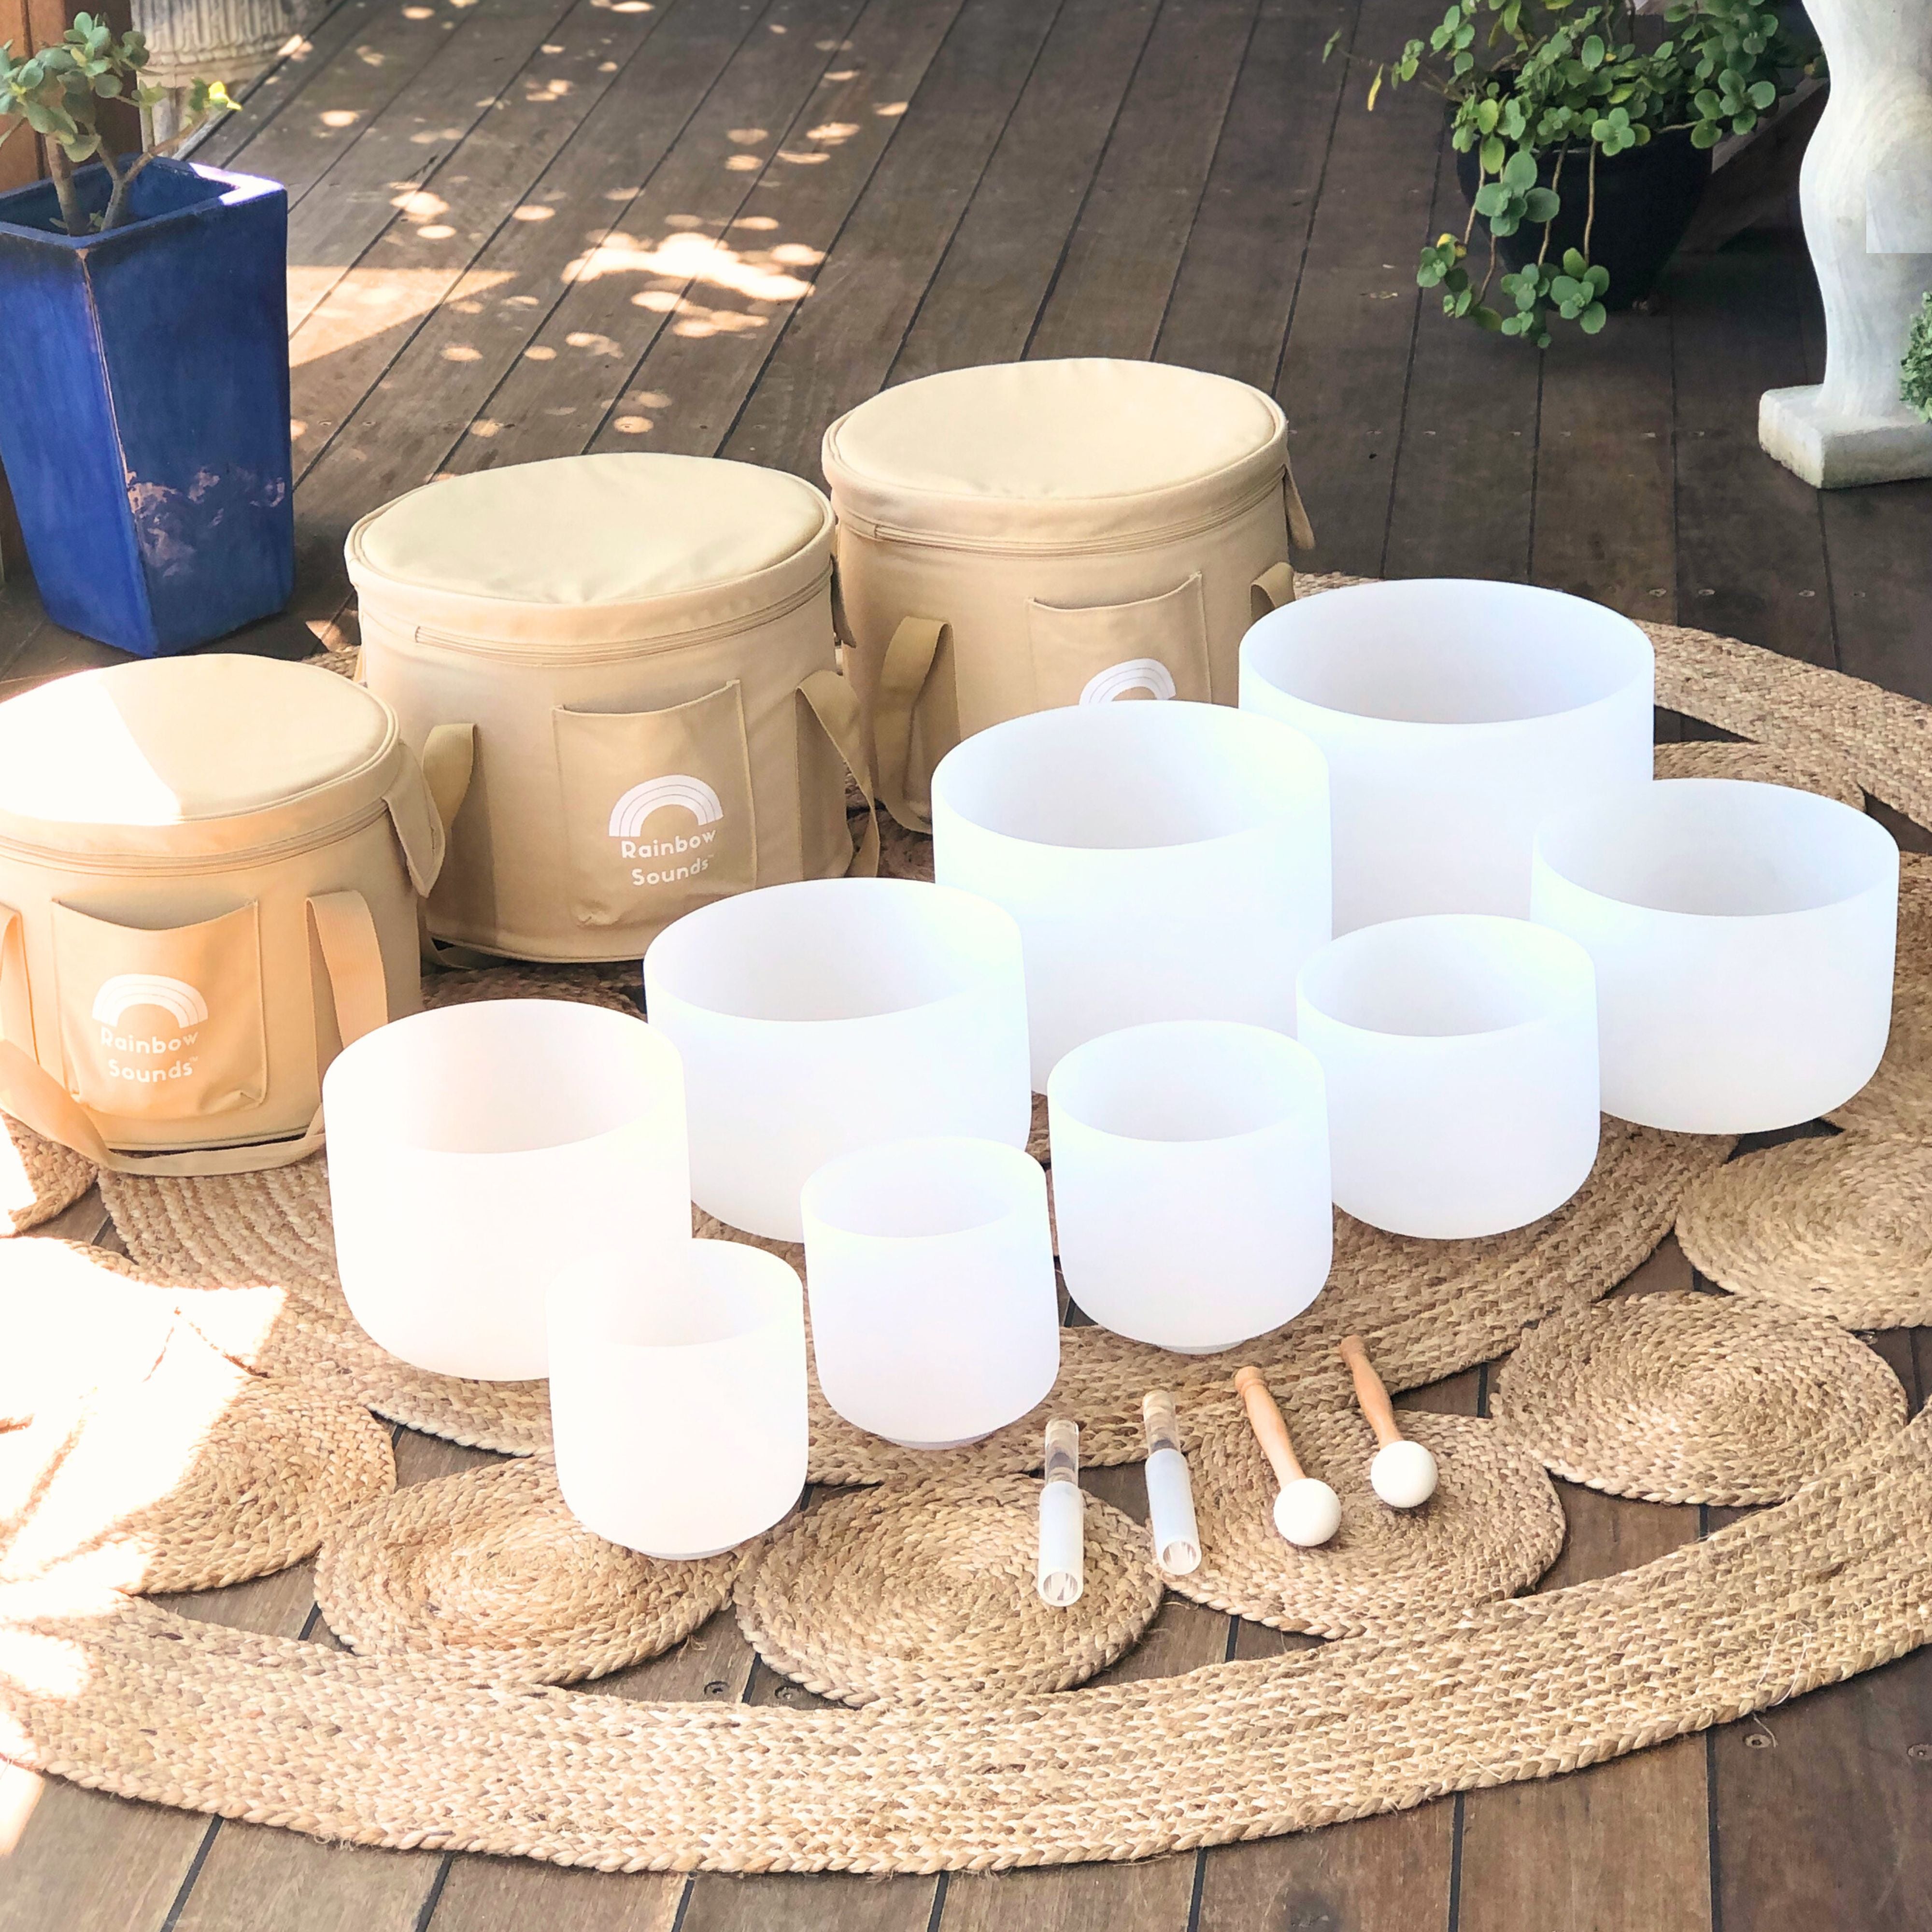 Full Chakra︱Set of 9 White Crystal Singing Bowls in Beige Bags